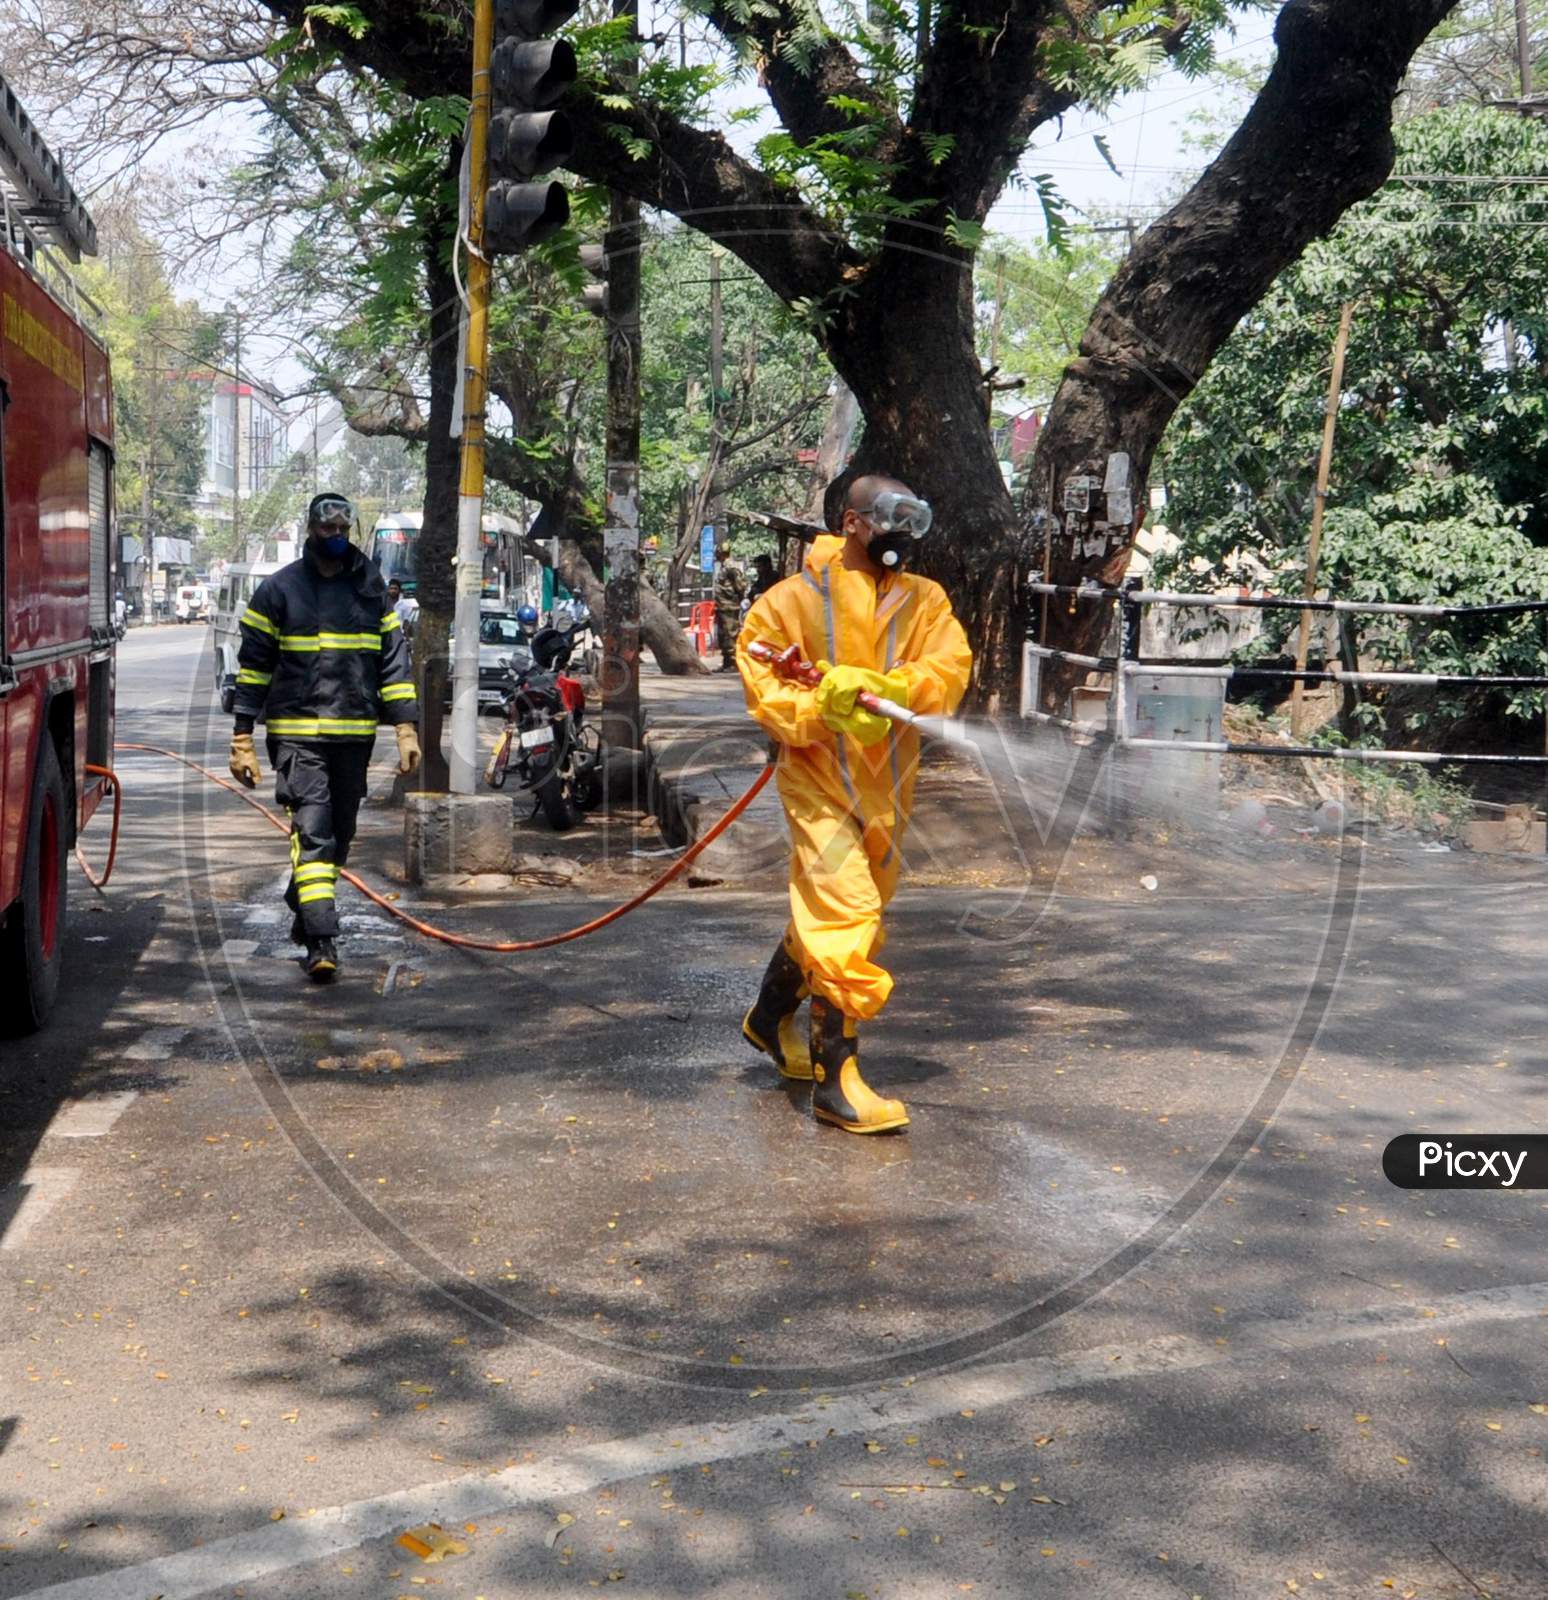 Firefighters spray disinfectants on streets